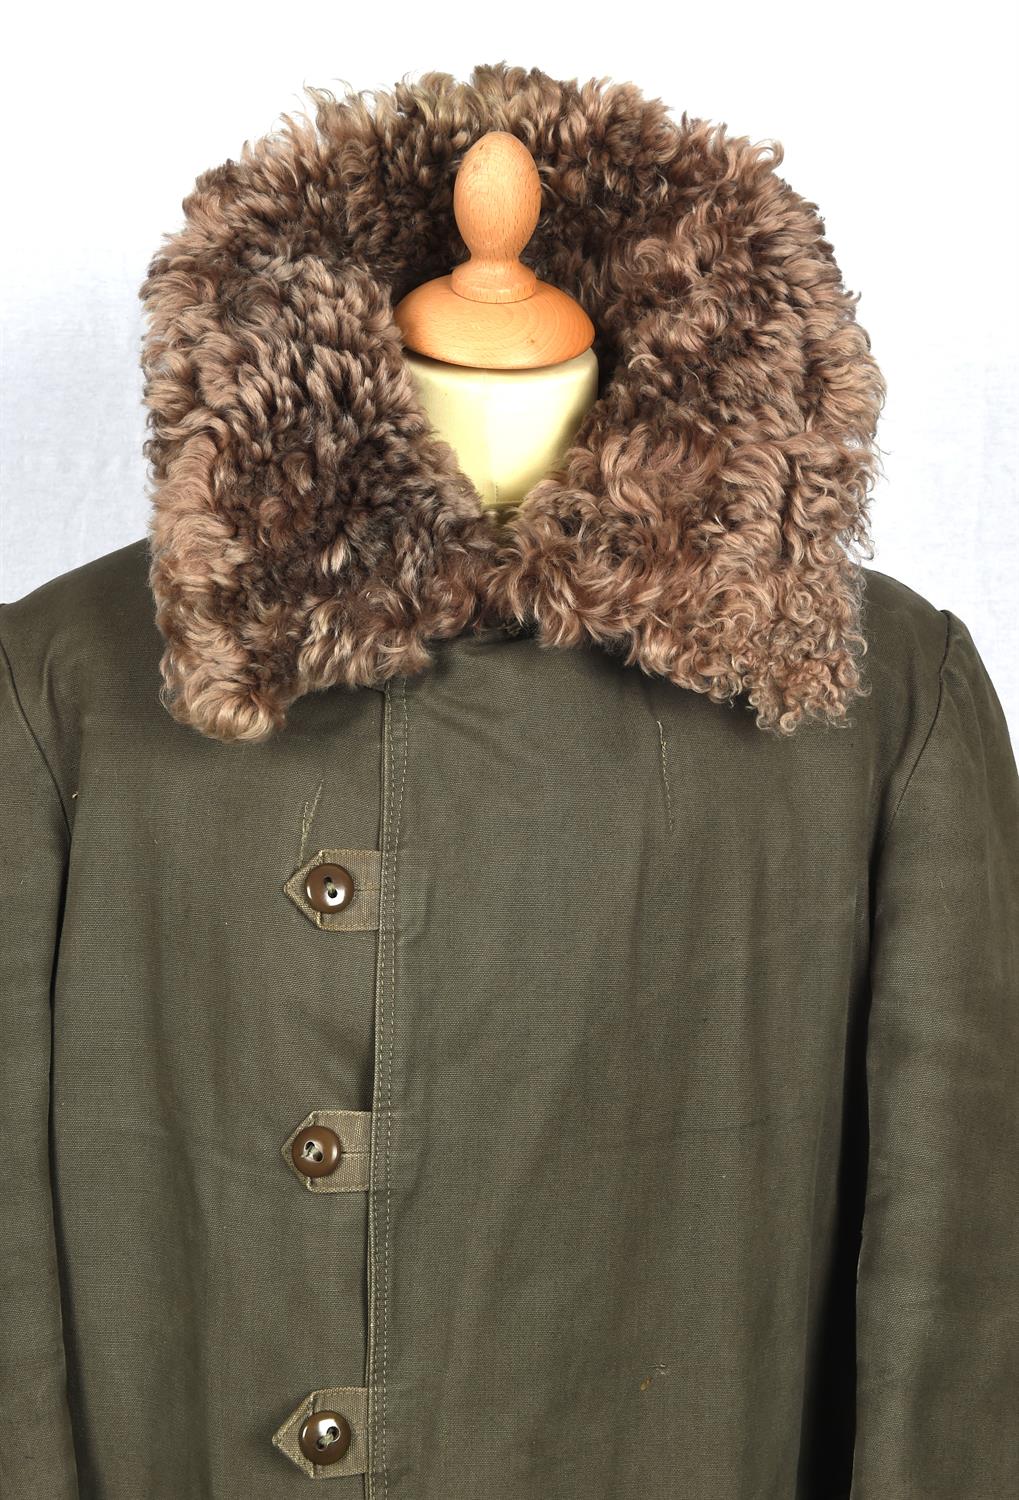 Vintage Mod-style c1960s (?) mans Swedish military very warm and heavy sheepskin-lined parka coat. - Image 3 of 10